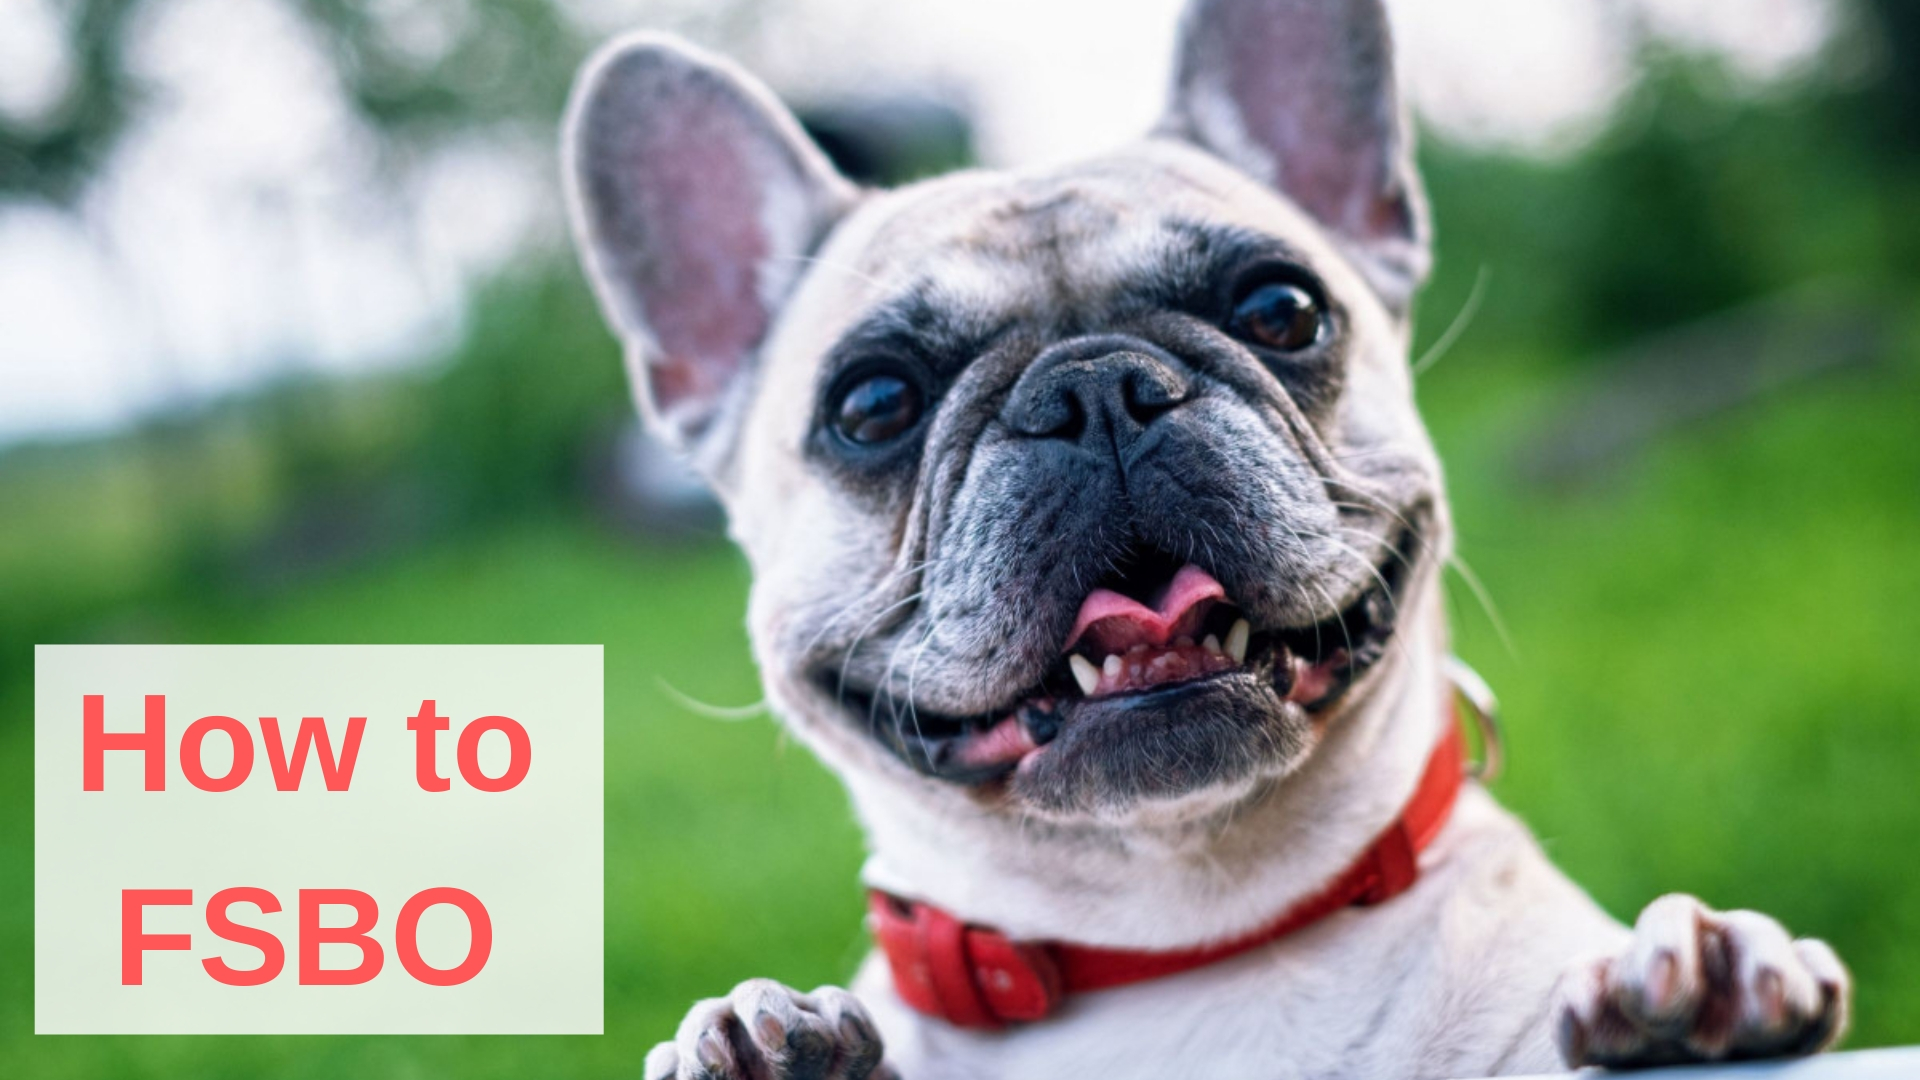 Image of puppy with caption 'How to FSBO'